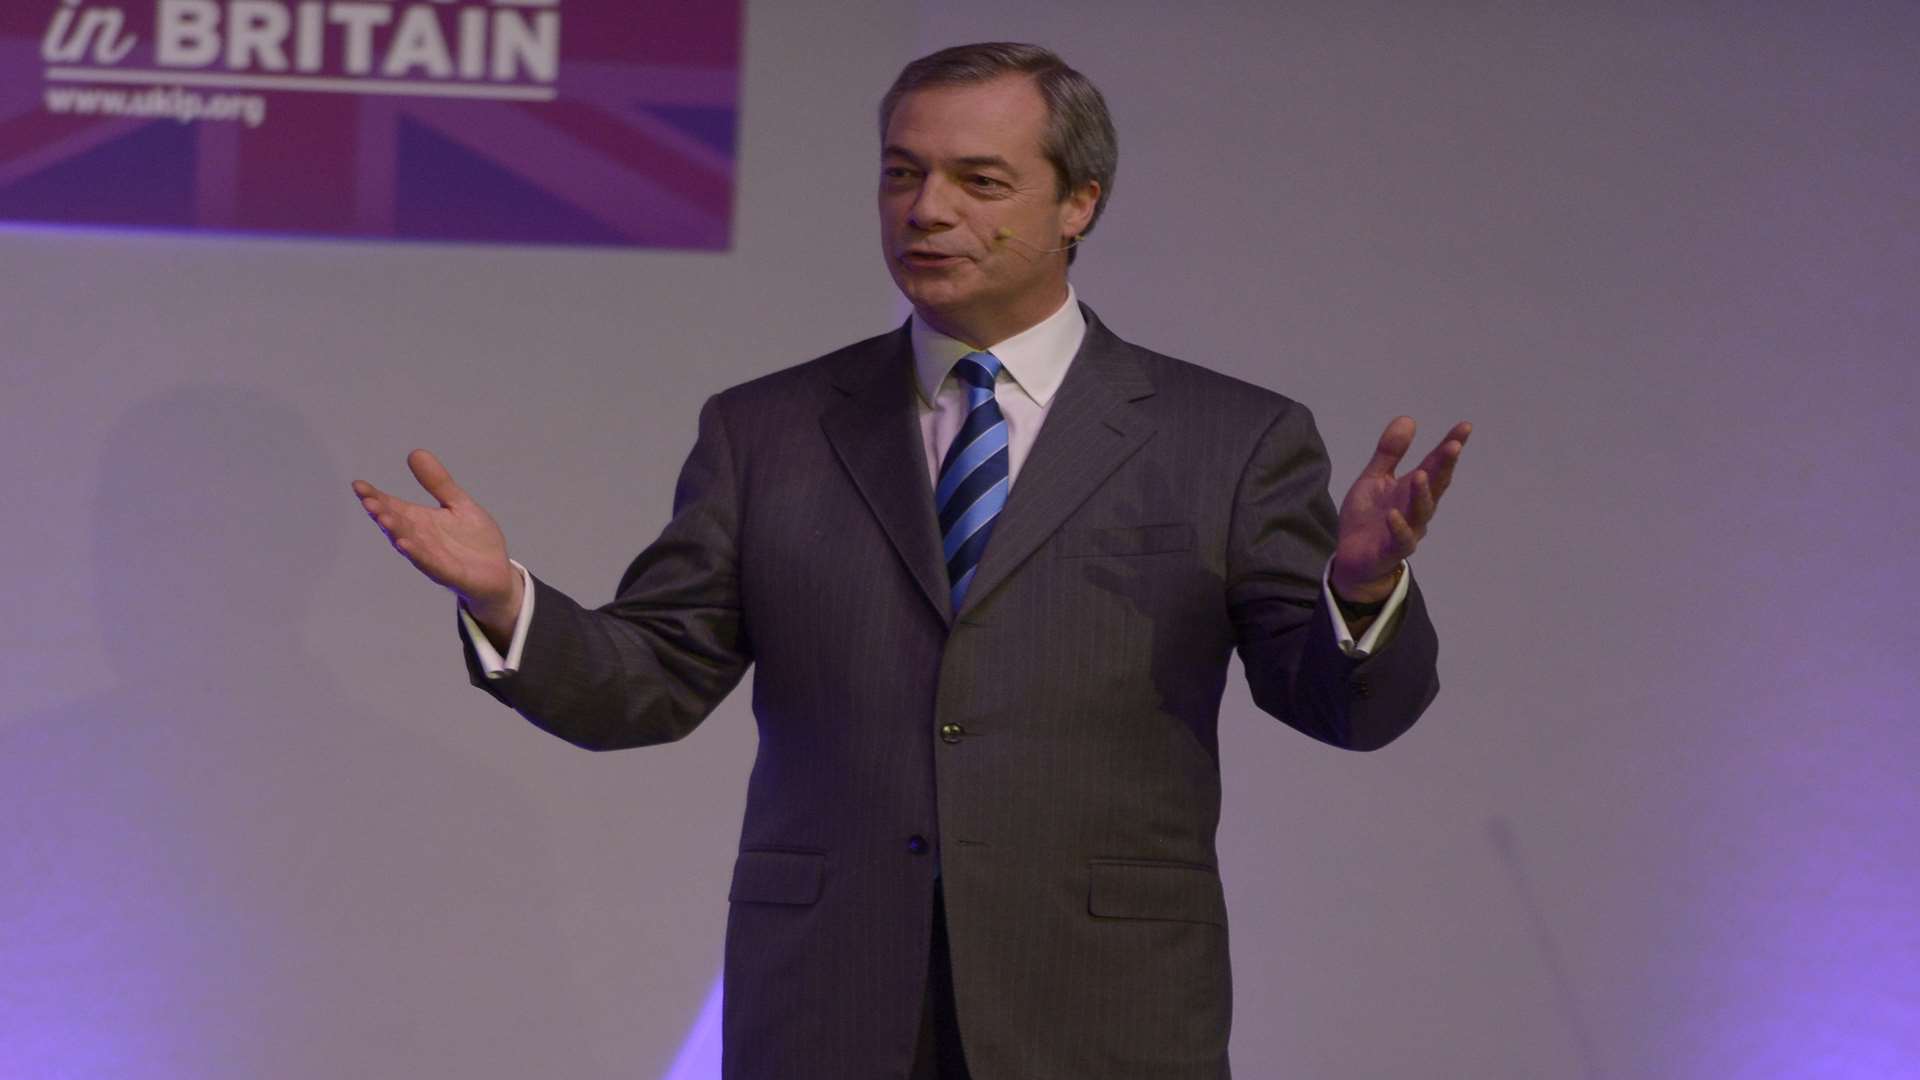 Nigel Farage in full flow at the conference